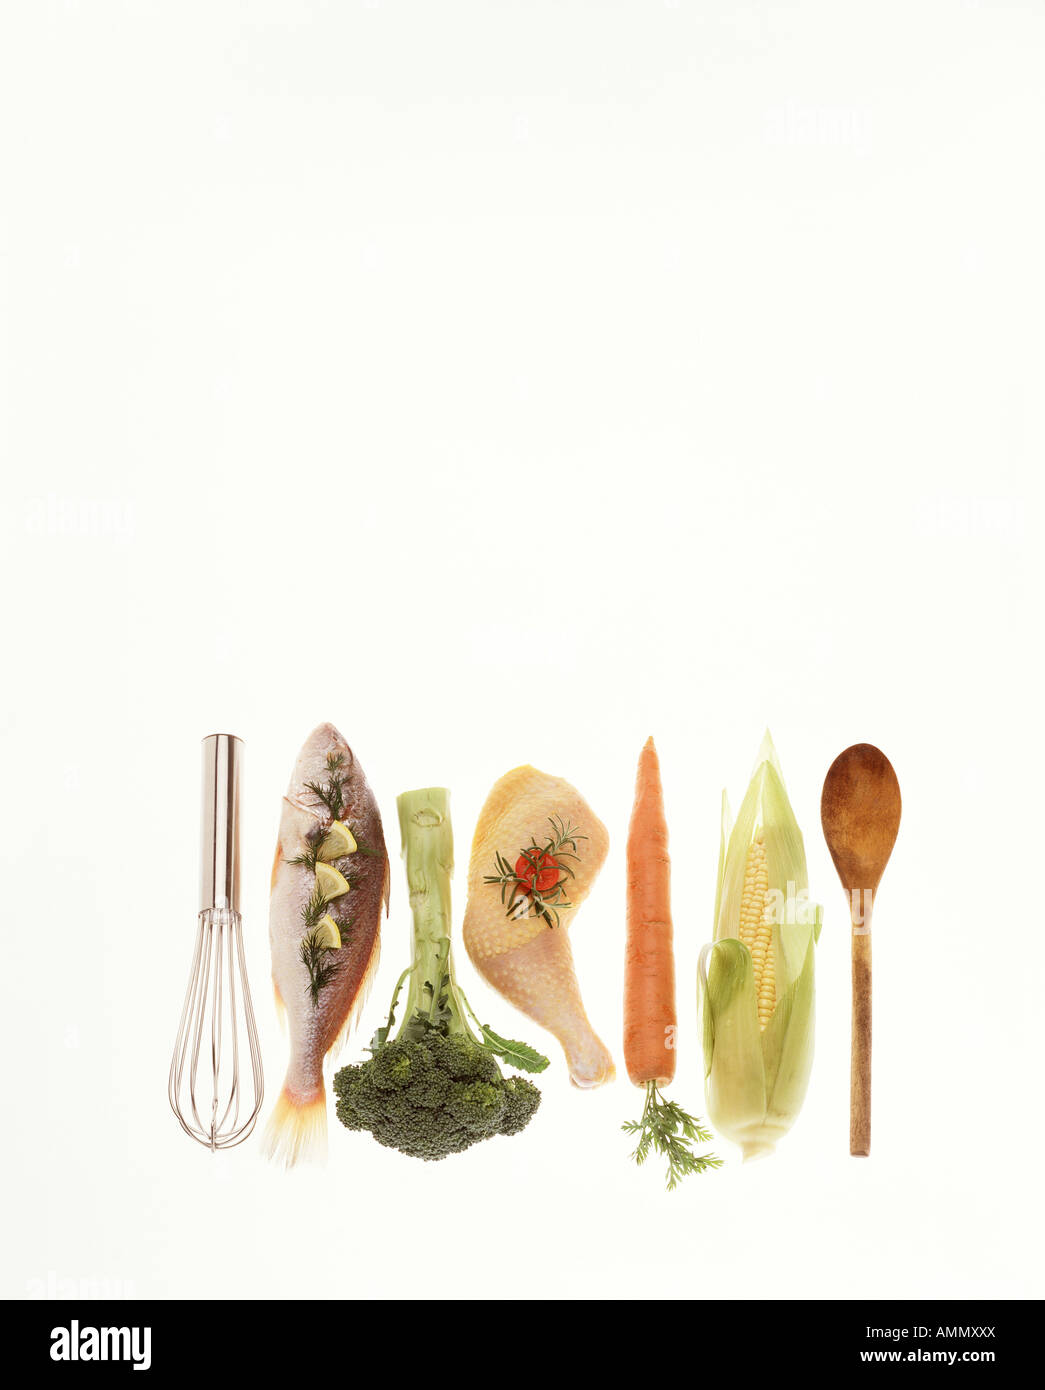 close up cook book recipe items raw fish chicken vegetable carrot corn on cob broccolli wooden spoon metal whisk copy space Stock Photo